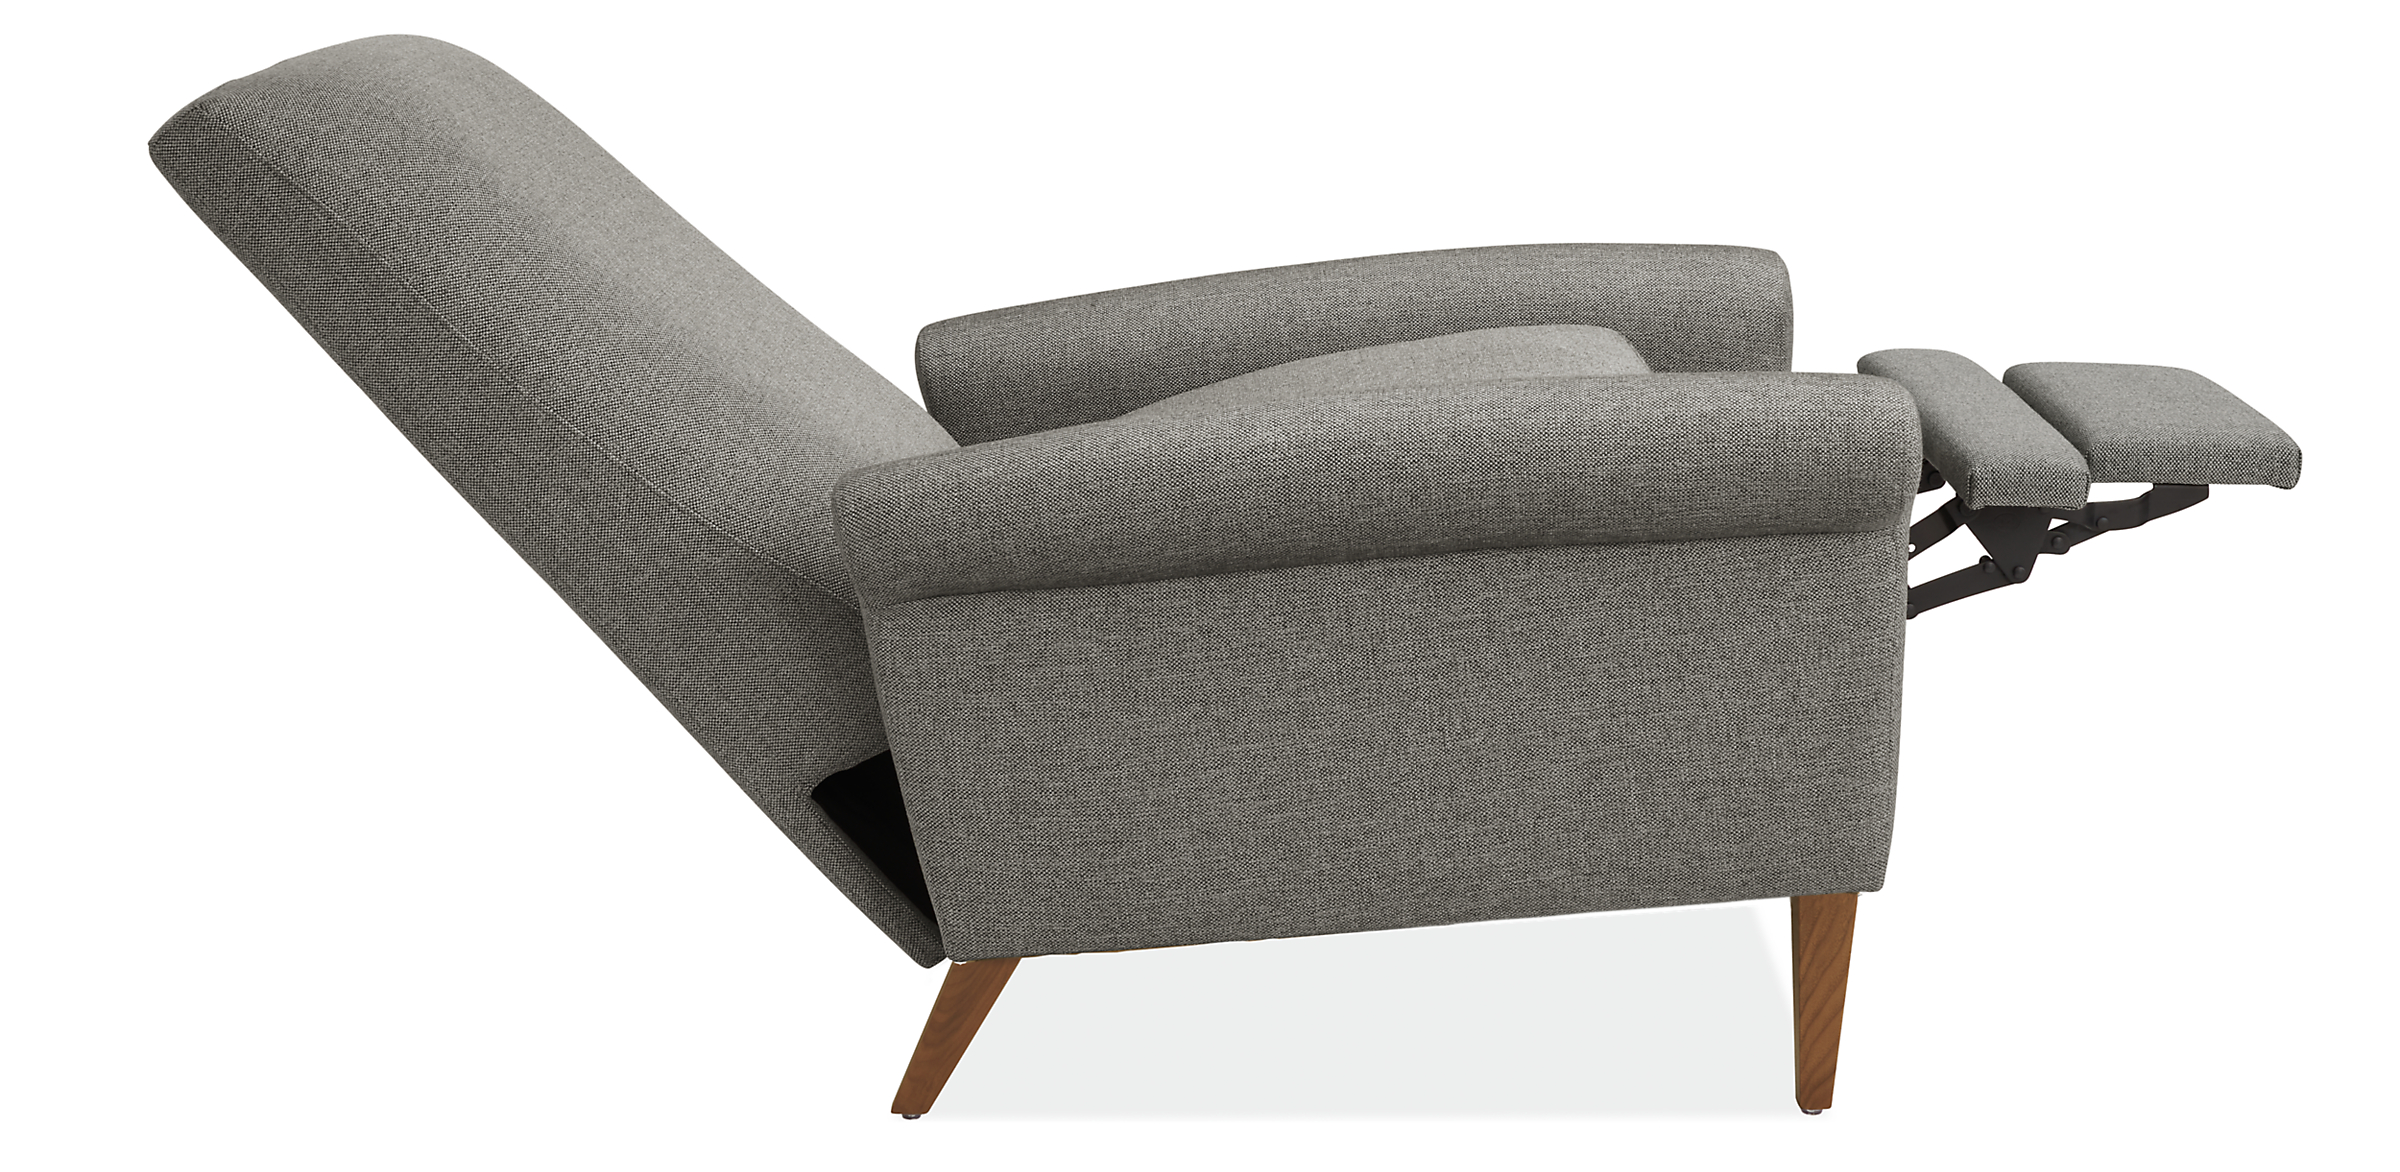 Open side view of Arlo Rolled-Arm Recliner in Tatum Fabric with wood legs in walnut.